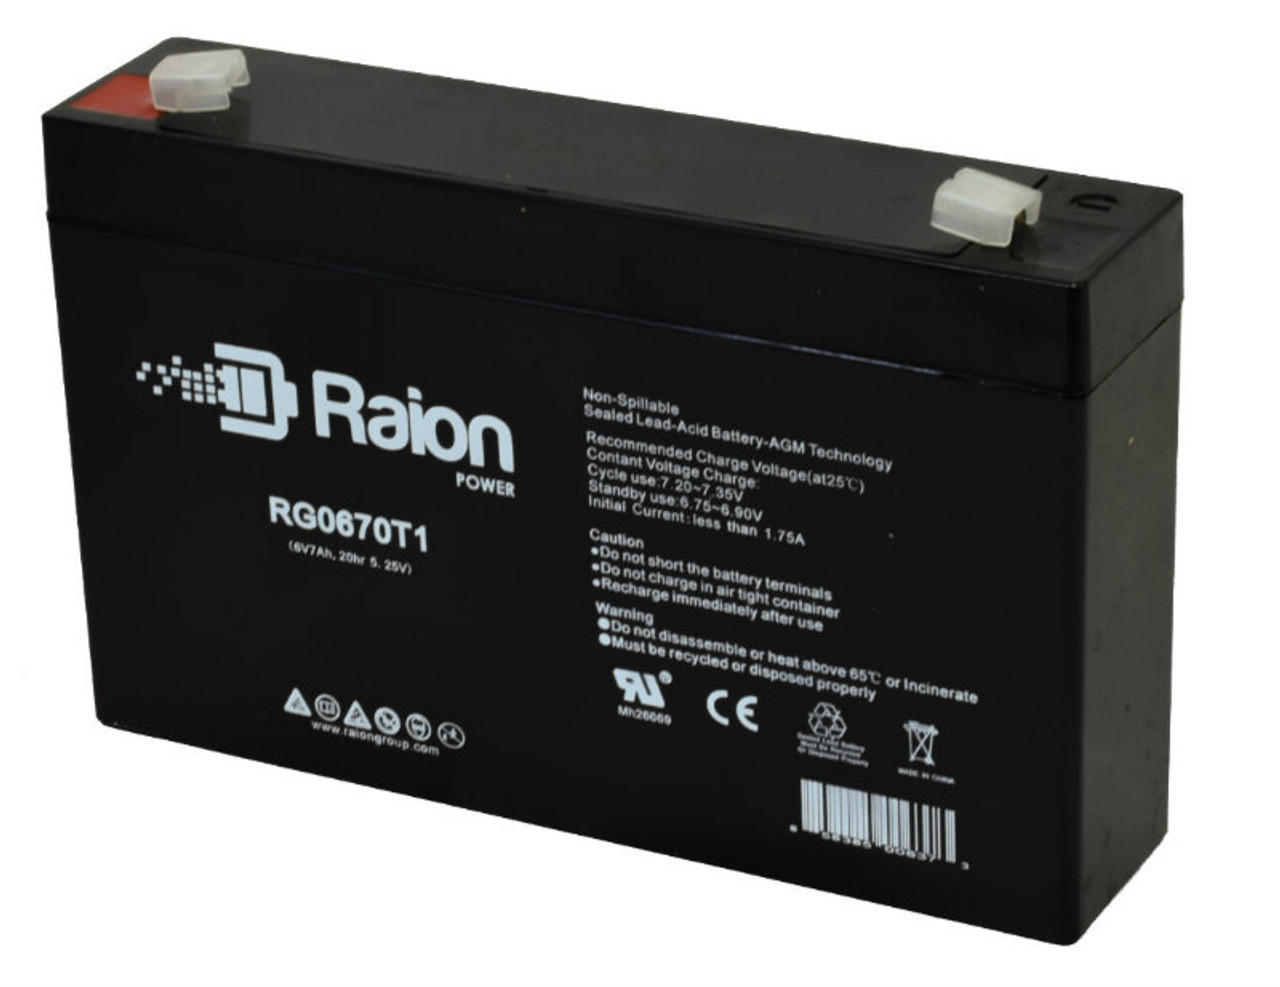 Raion Power RG0670T1 6V 7Ah Replacement Emergency Light Battery for National Power GS013P2